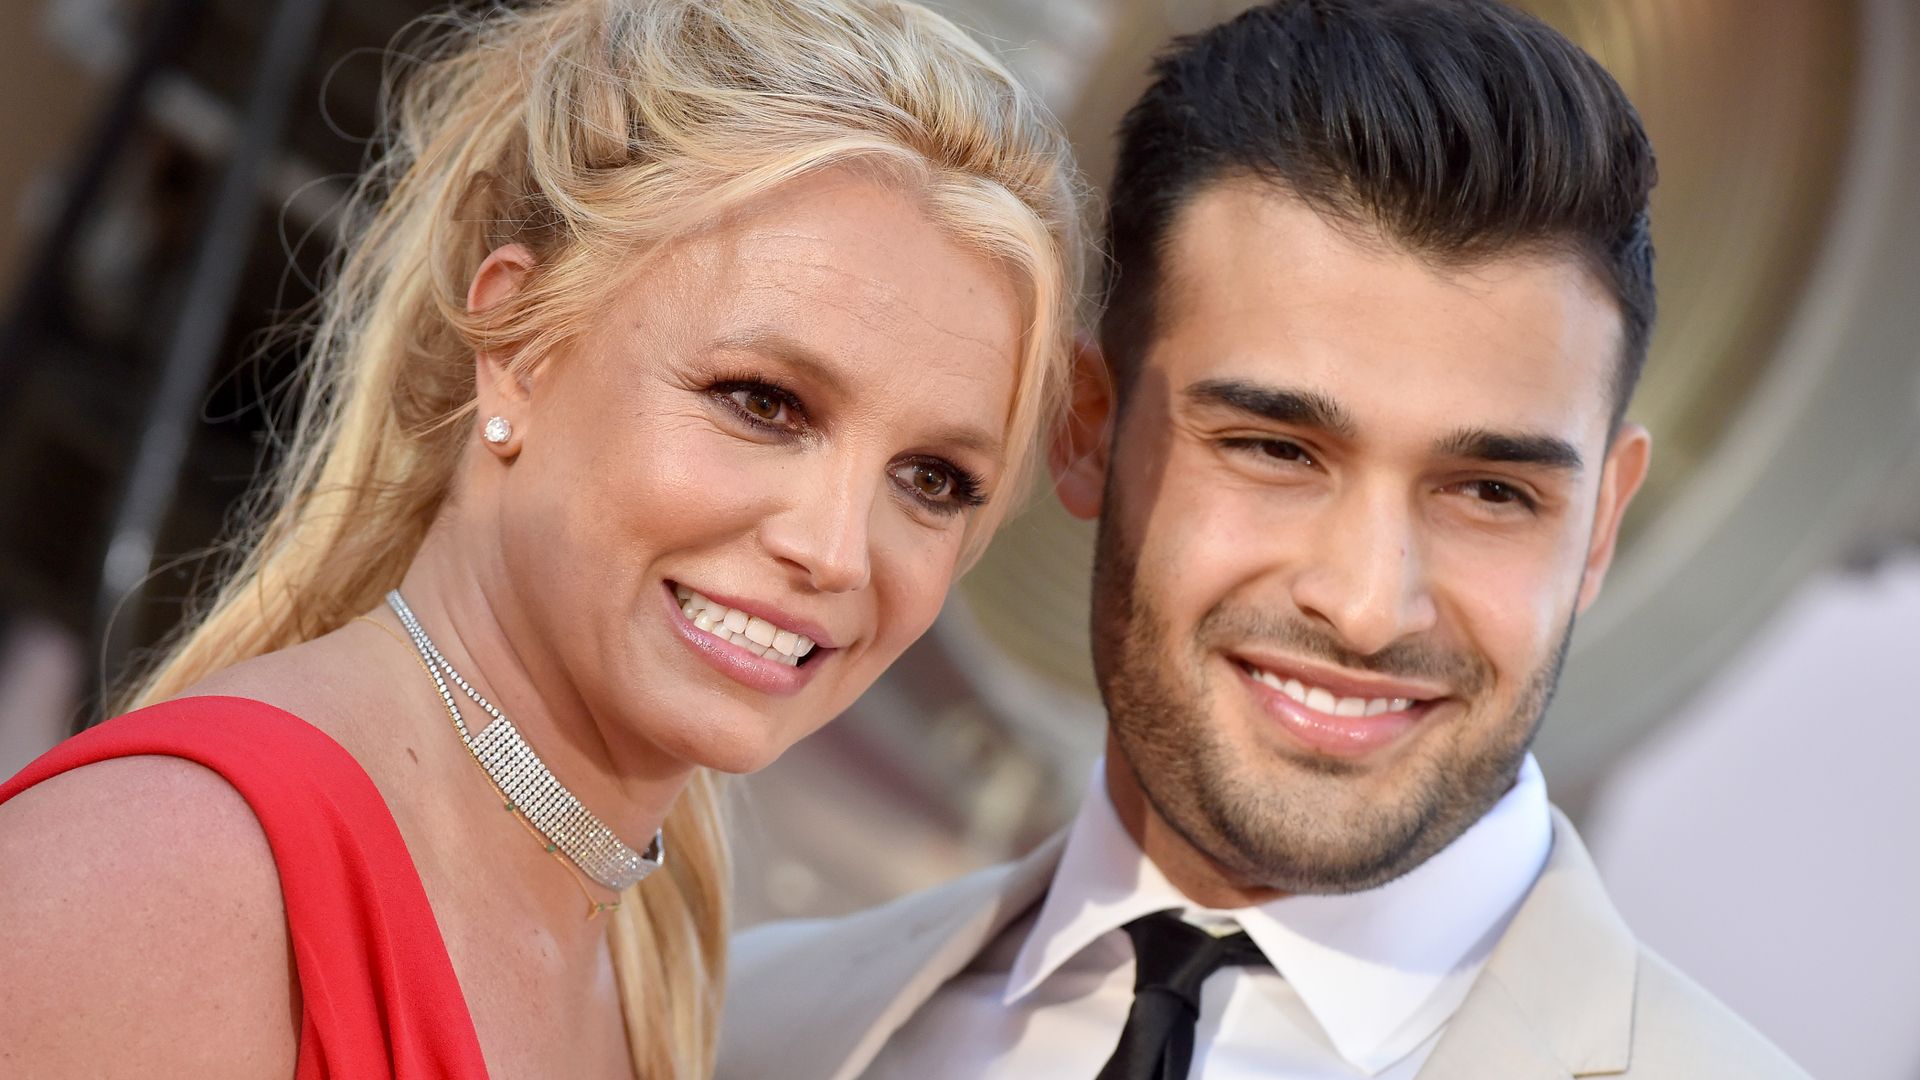 Britney Spears and Sam Asghari attend Sony Pictures' "Once Upon a Time ... in Hollywood" Los Angeles Premiere on July 22, 2019 in Hollywood, California. (Photo by Axelle/Bauer-Griffin/FilmMagic)